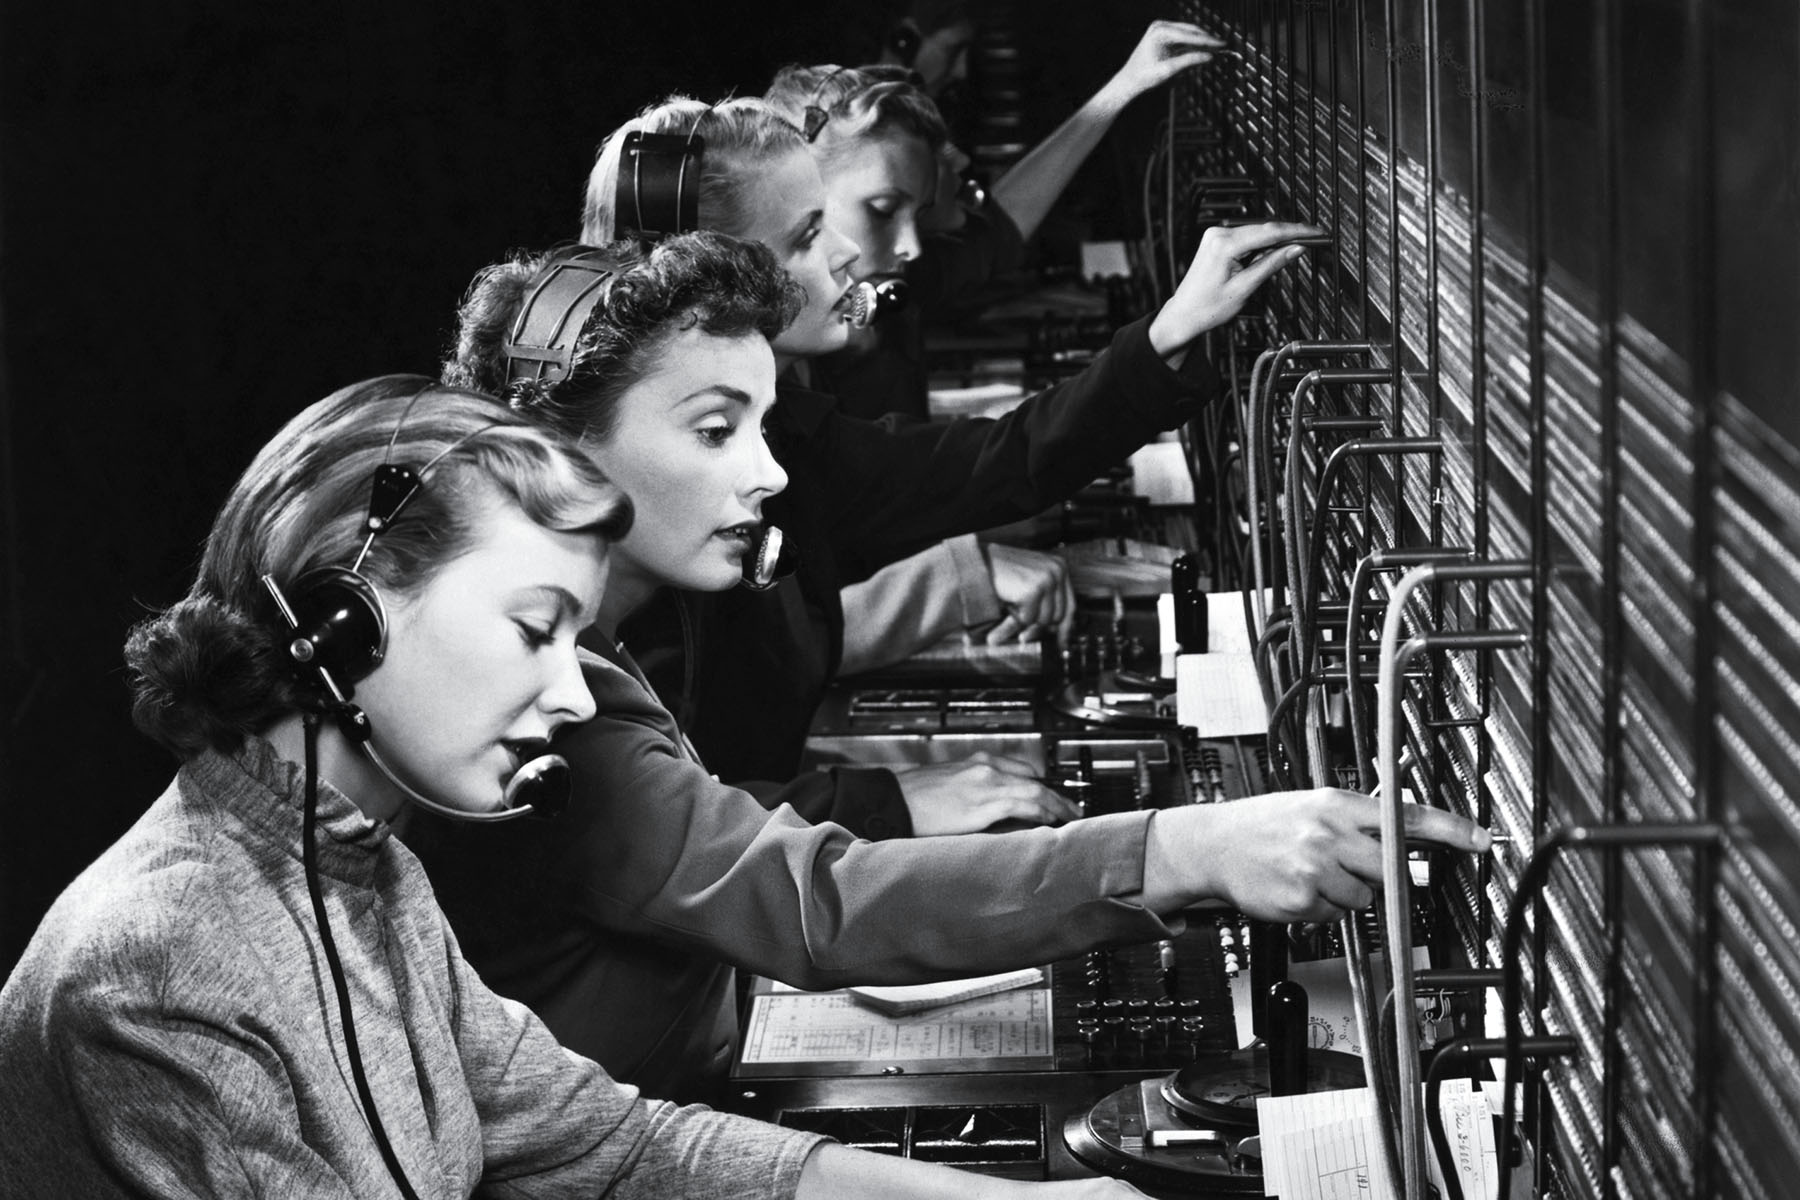 Women are seen from the side, operating a switchboard, in a black and white photo.